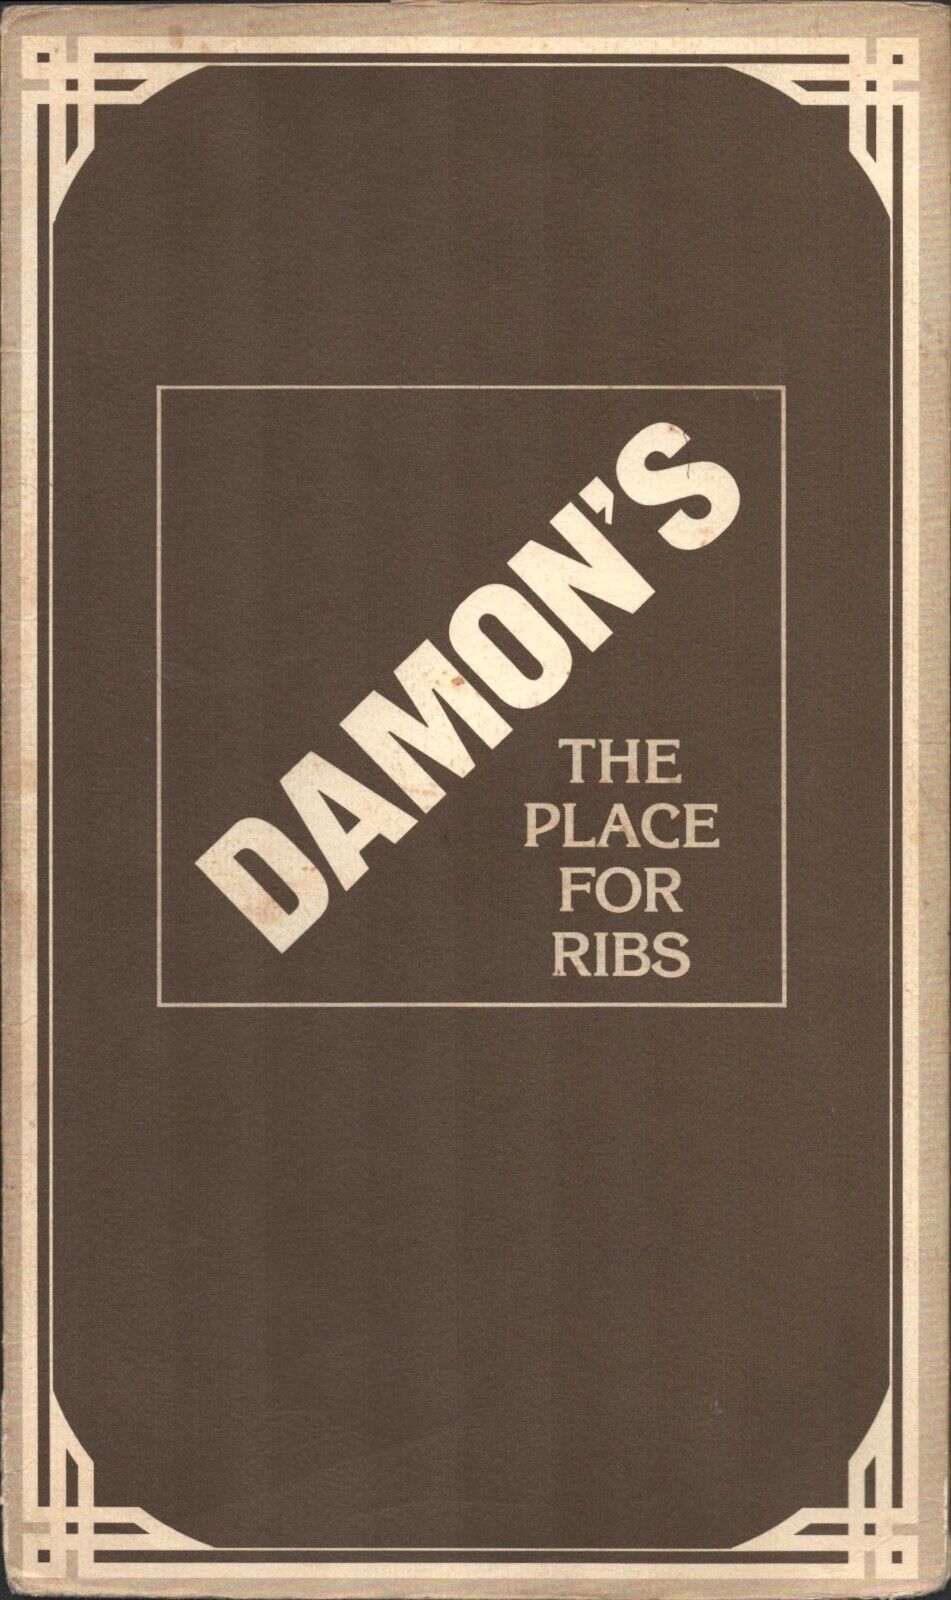 1986 DAMON\'S: THE PLACE FOR RIBS vintage restaurant dining menu EAST COAST CHAIN